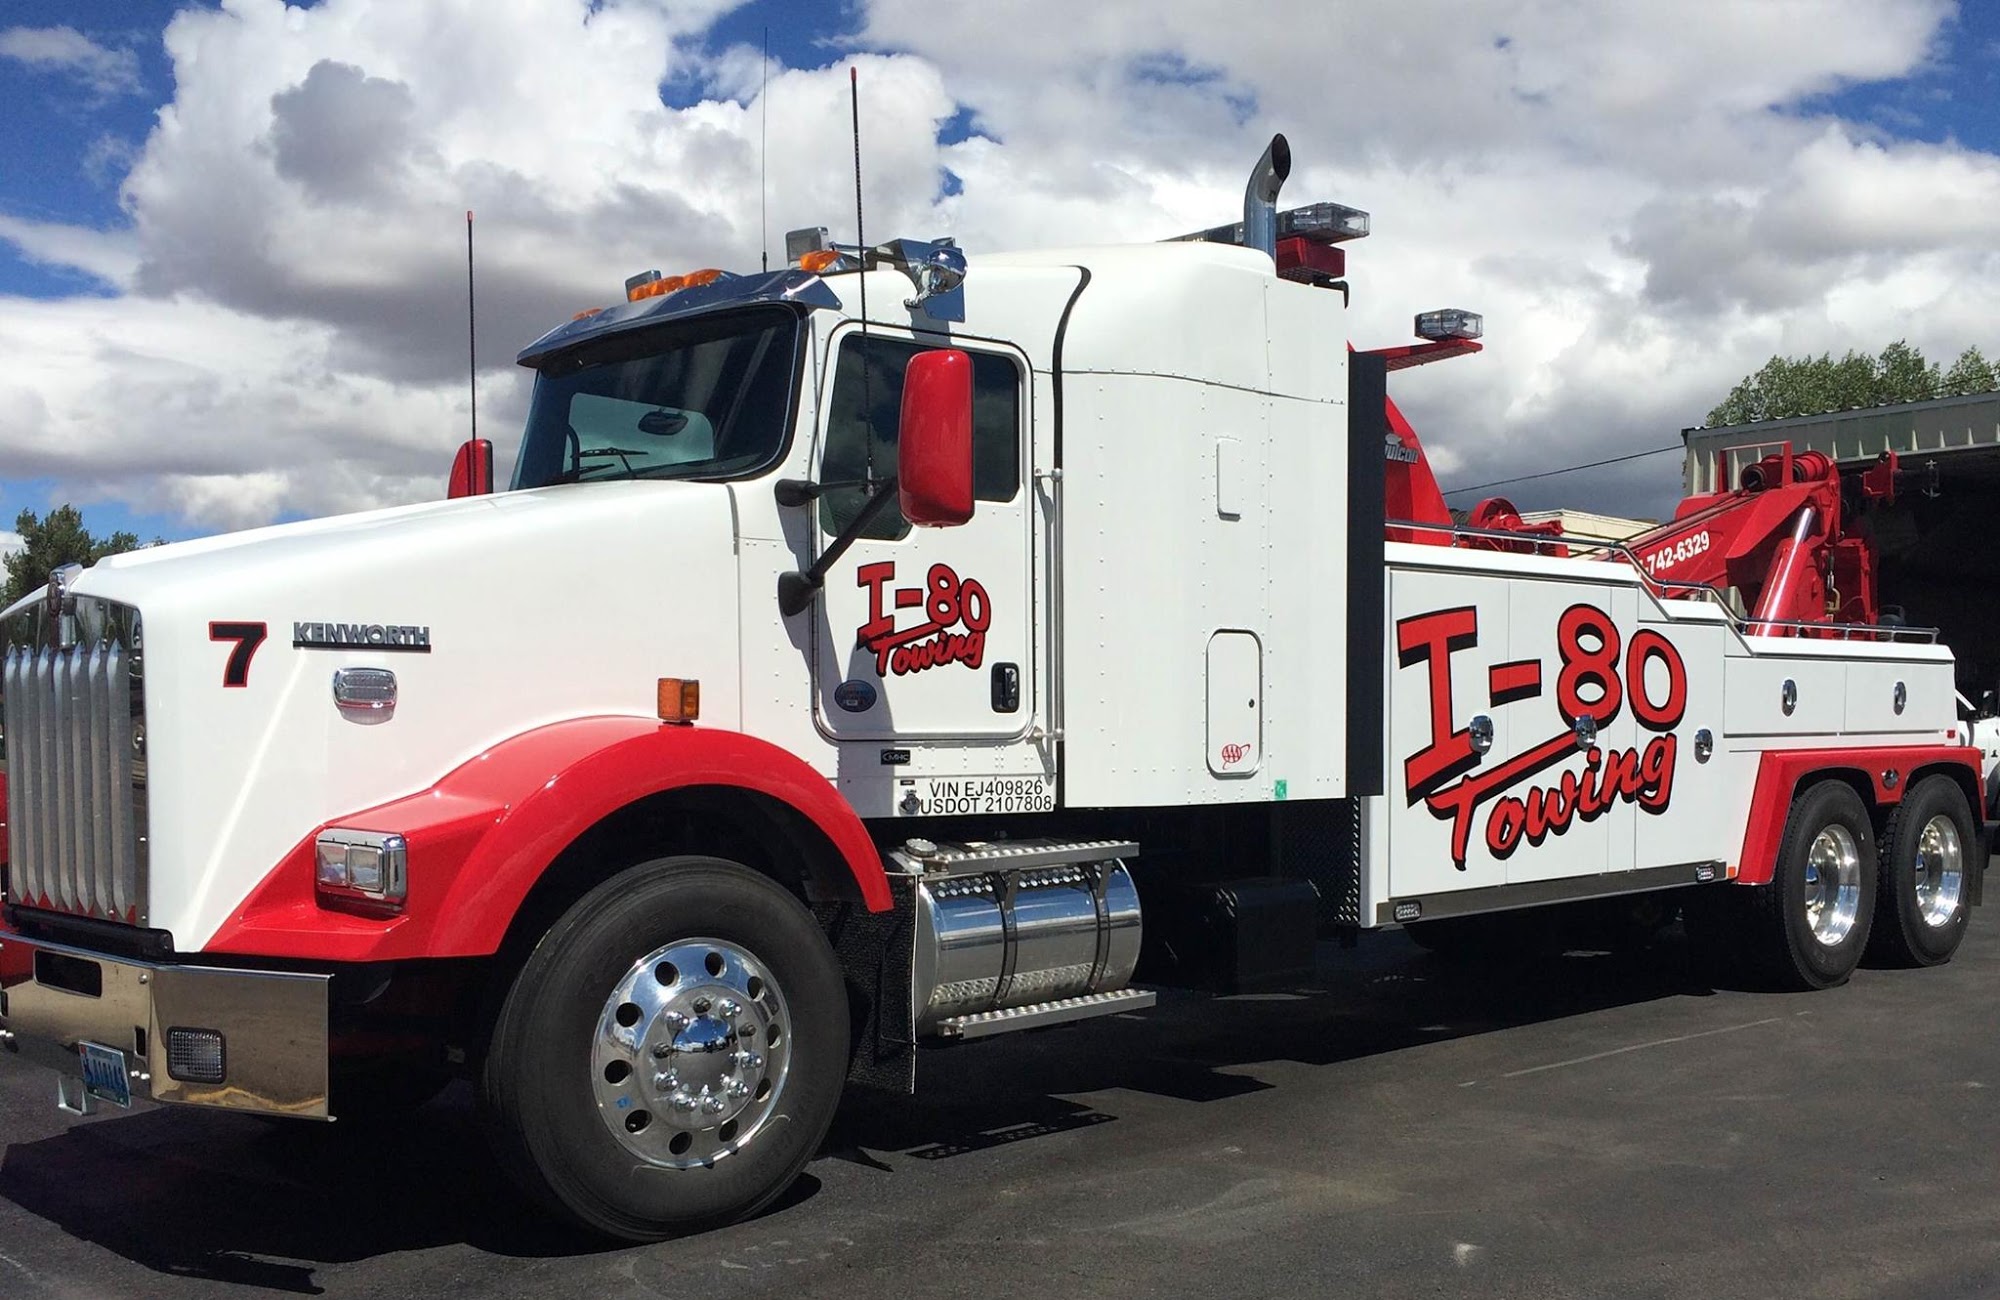 I-80 Towing & Service